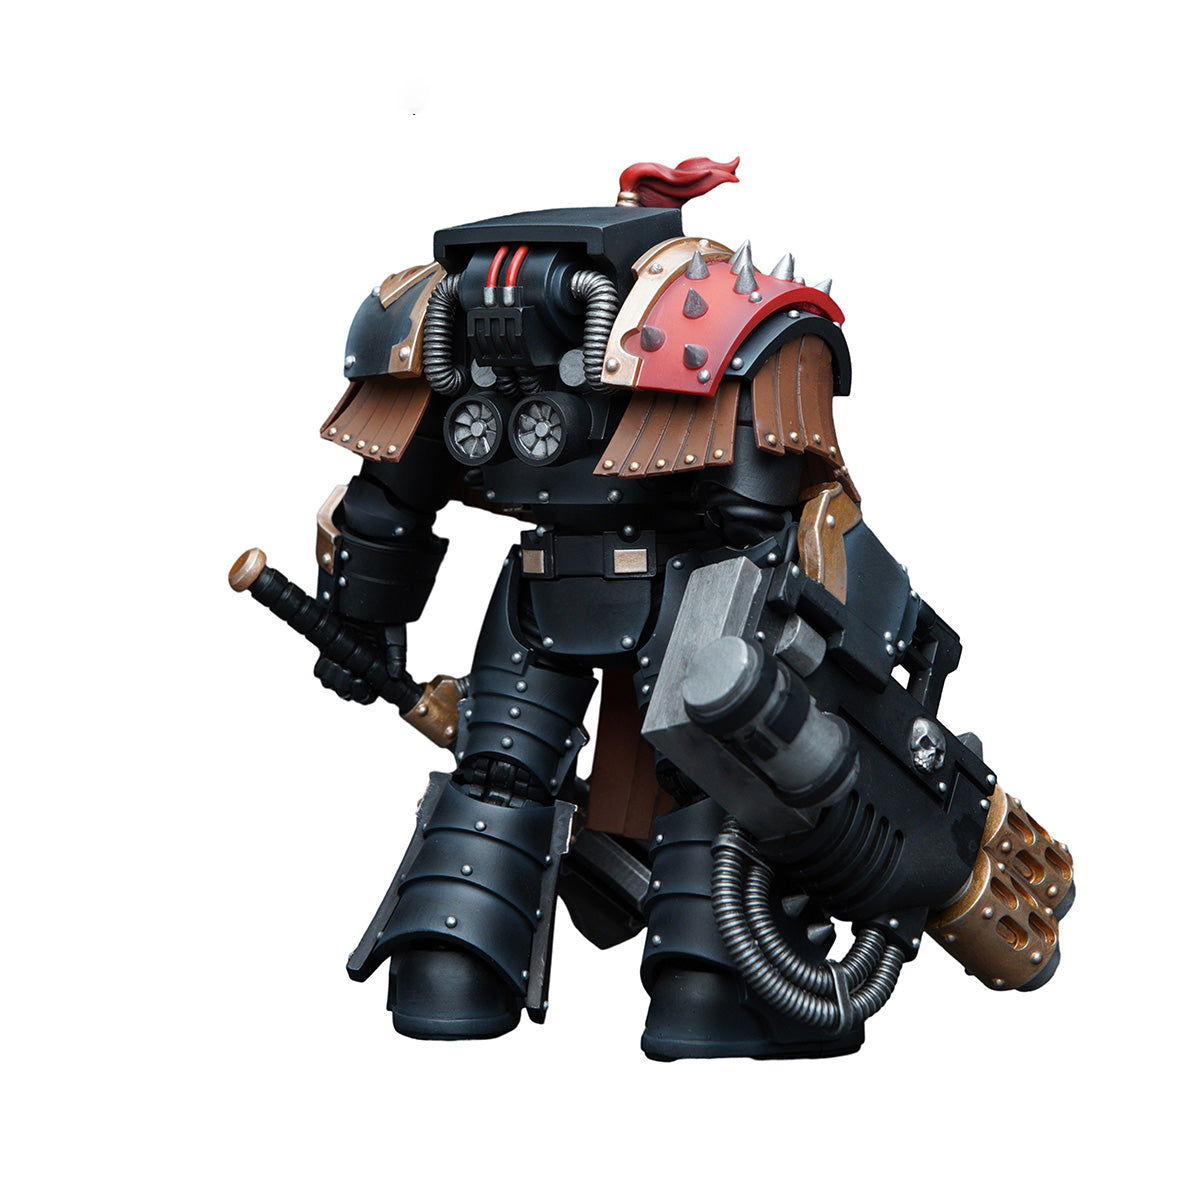 Joy Toy - JT9749 - Warhammer 40,000 - Sons of Horus - Justaerin Terminator Squad Justaerin with Multi-melta and Power Maul (1/18 Scale) - Marvelous Toys